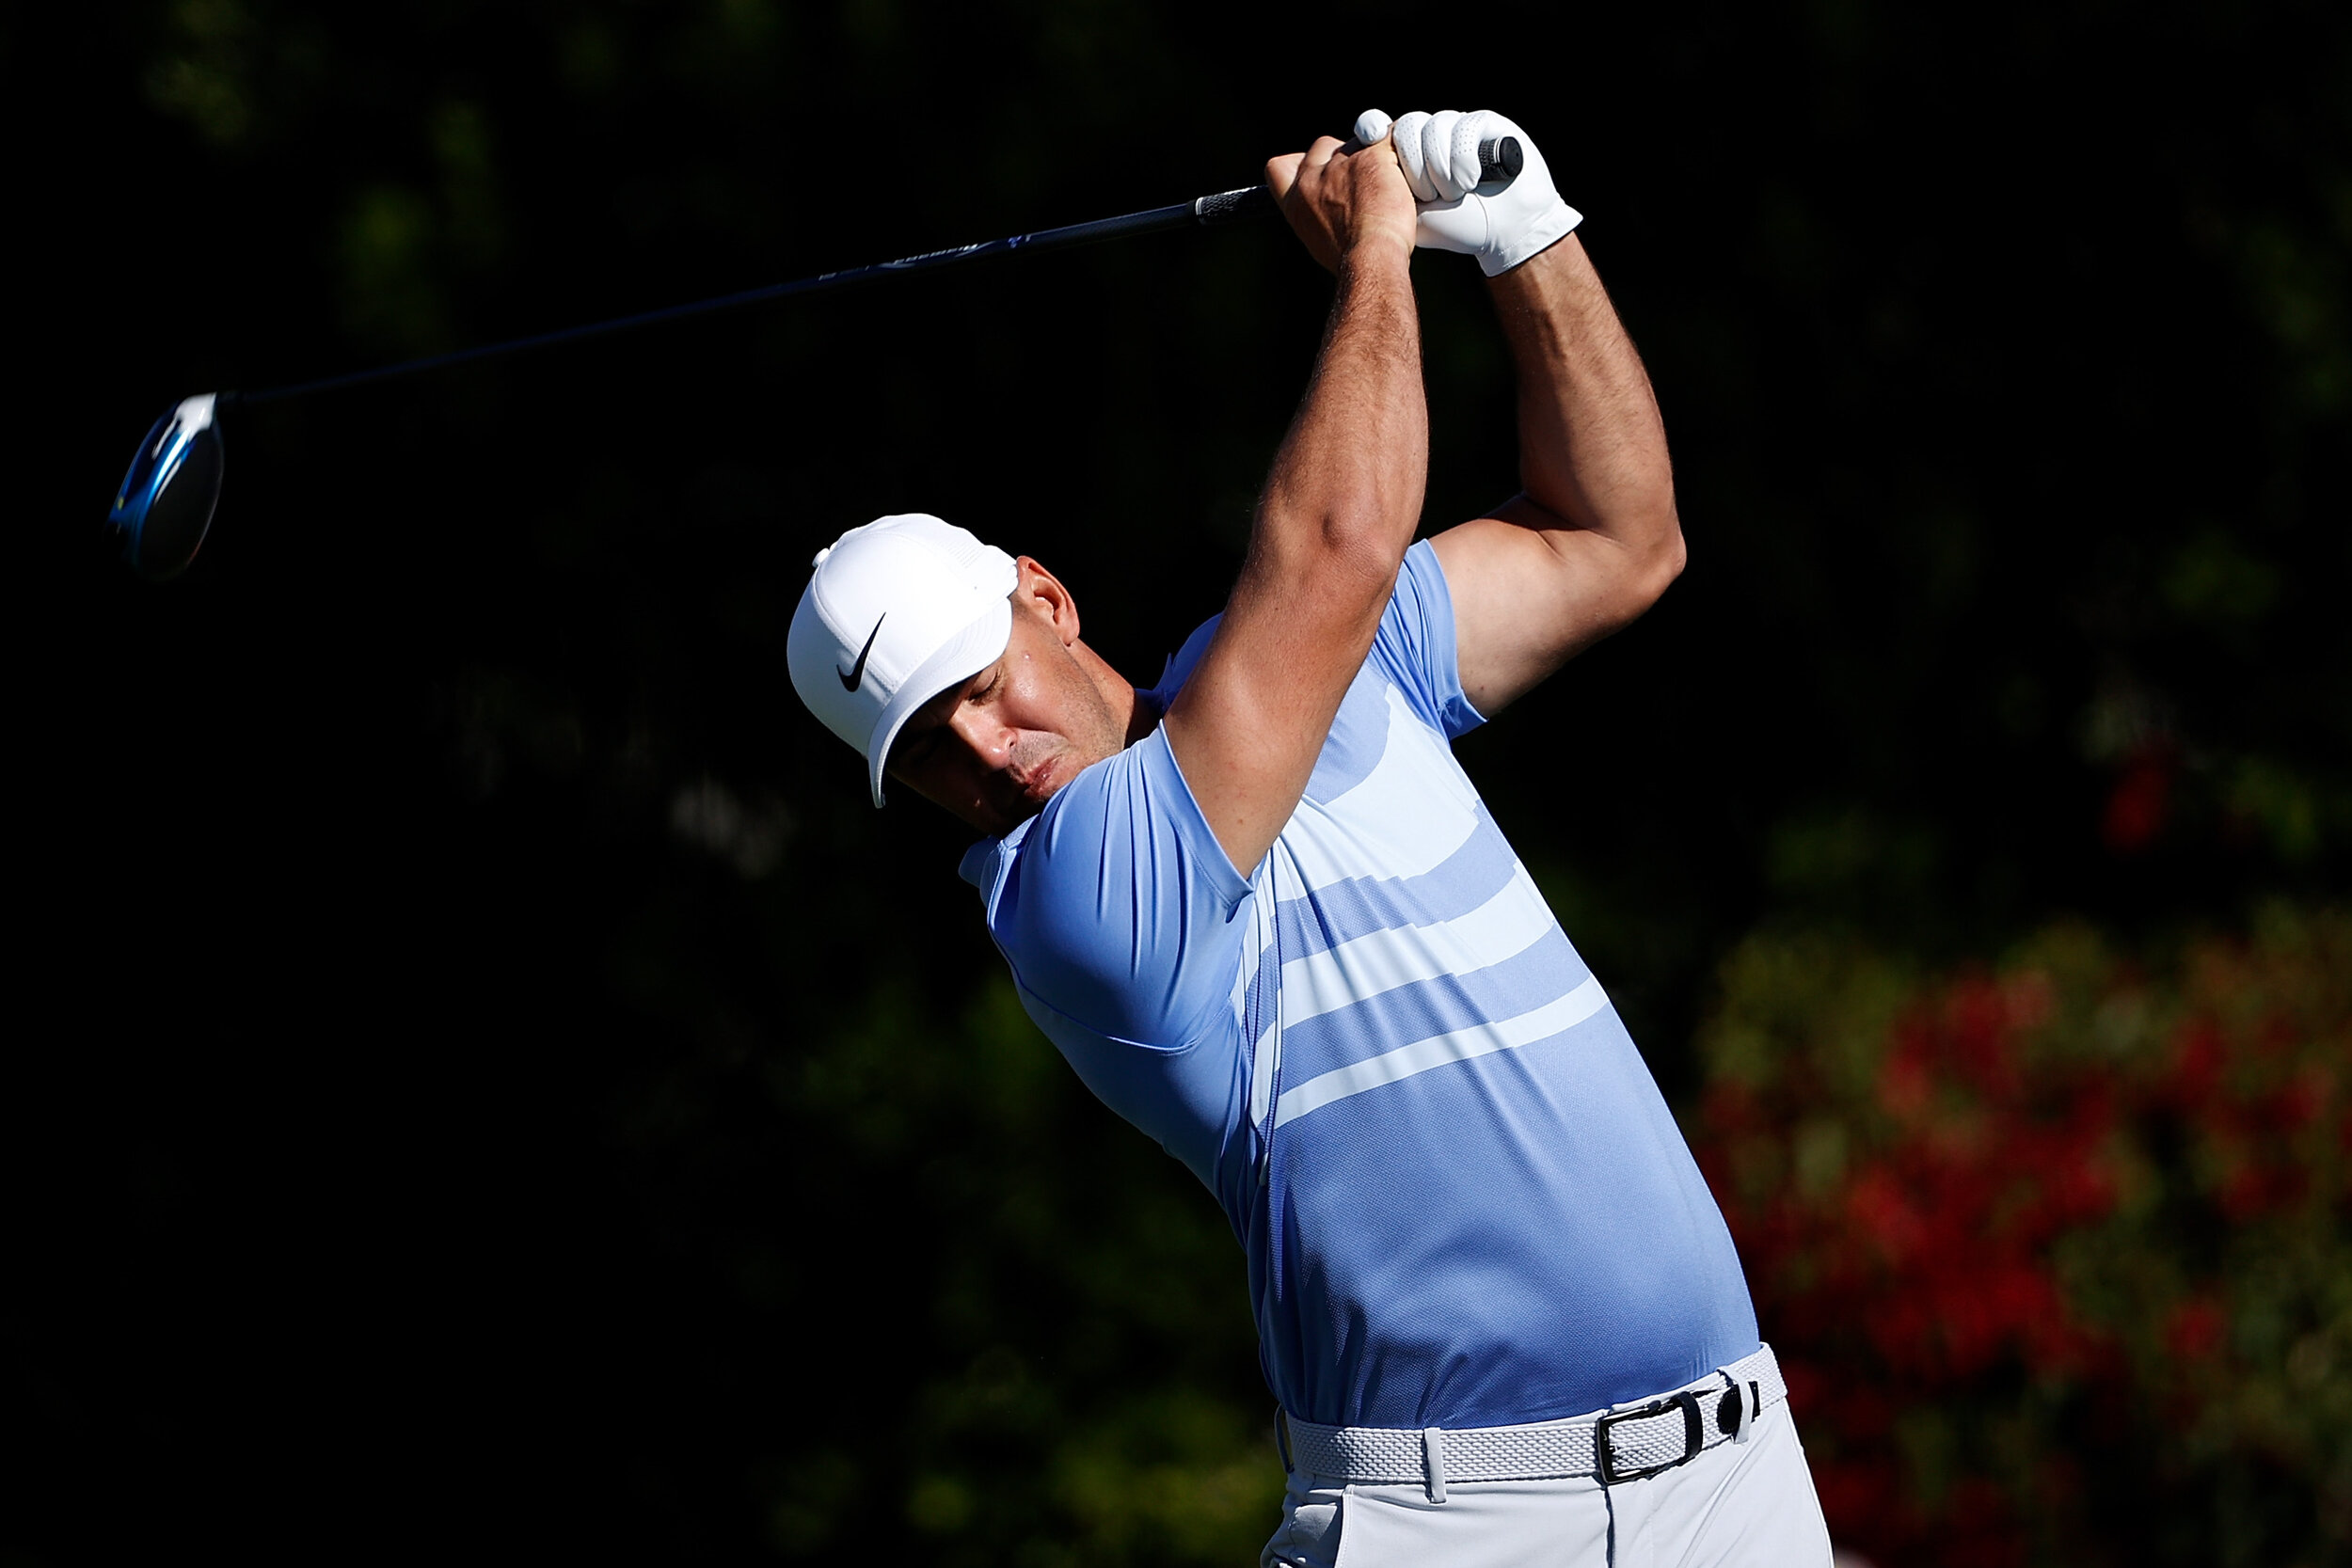  SCOTTSDALE, ARIZONA - FEBRUARY 07: Brooks Koepka of the United States hits his tee shot on the second hole during the final round of the Waste Management Phoenix Open at TPC Scottsdale on February 07, 2021 in Scottsdale, Arizona. (Photo by Christian